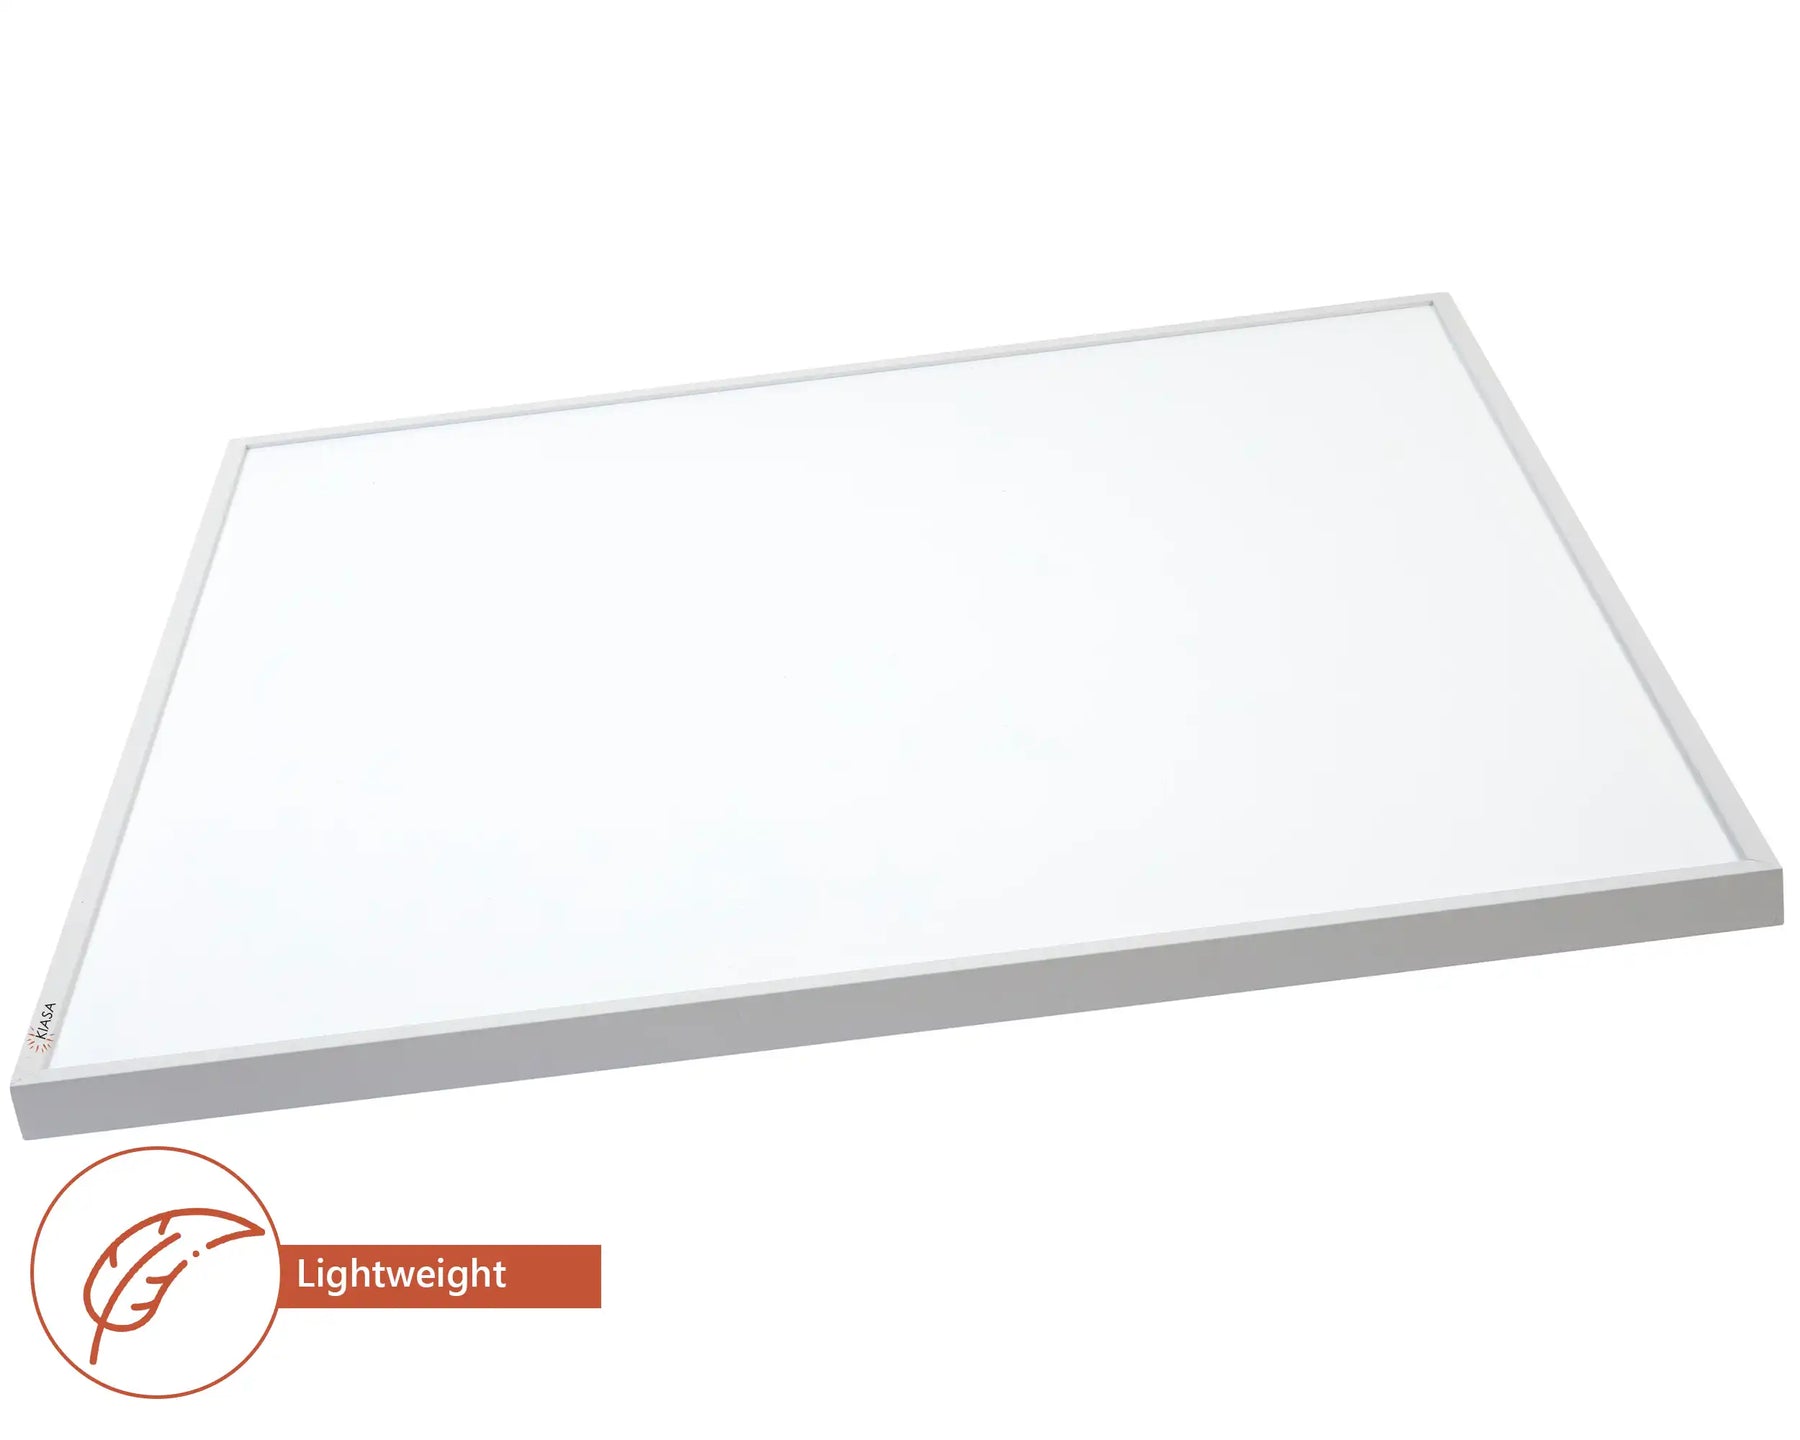 600W Smart Wi-Fi Infrared Heating Panel - Grade A